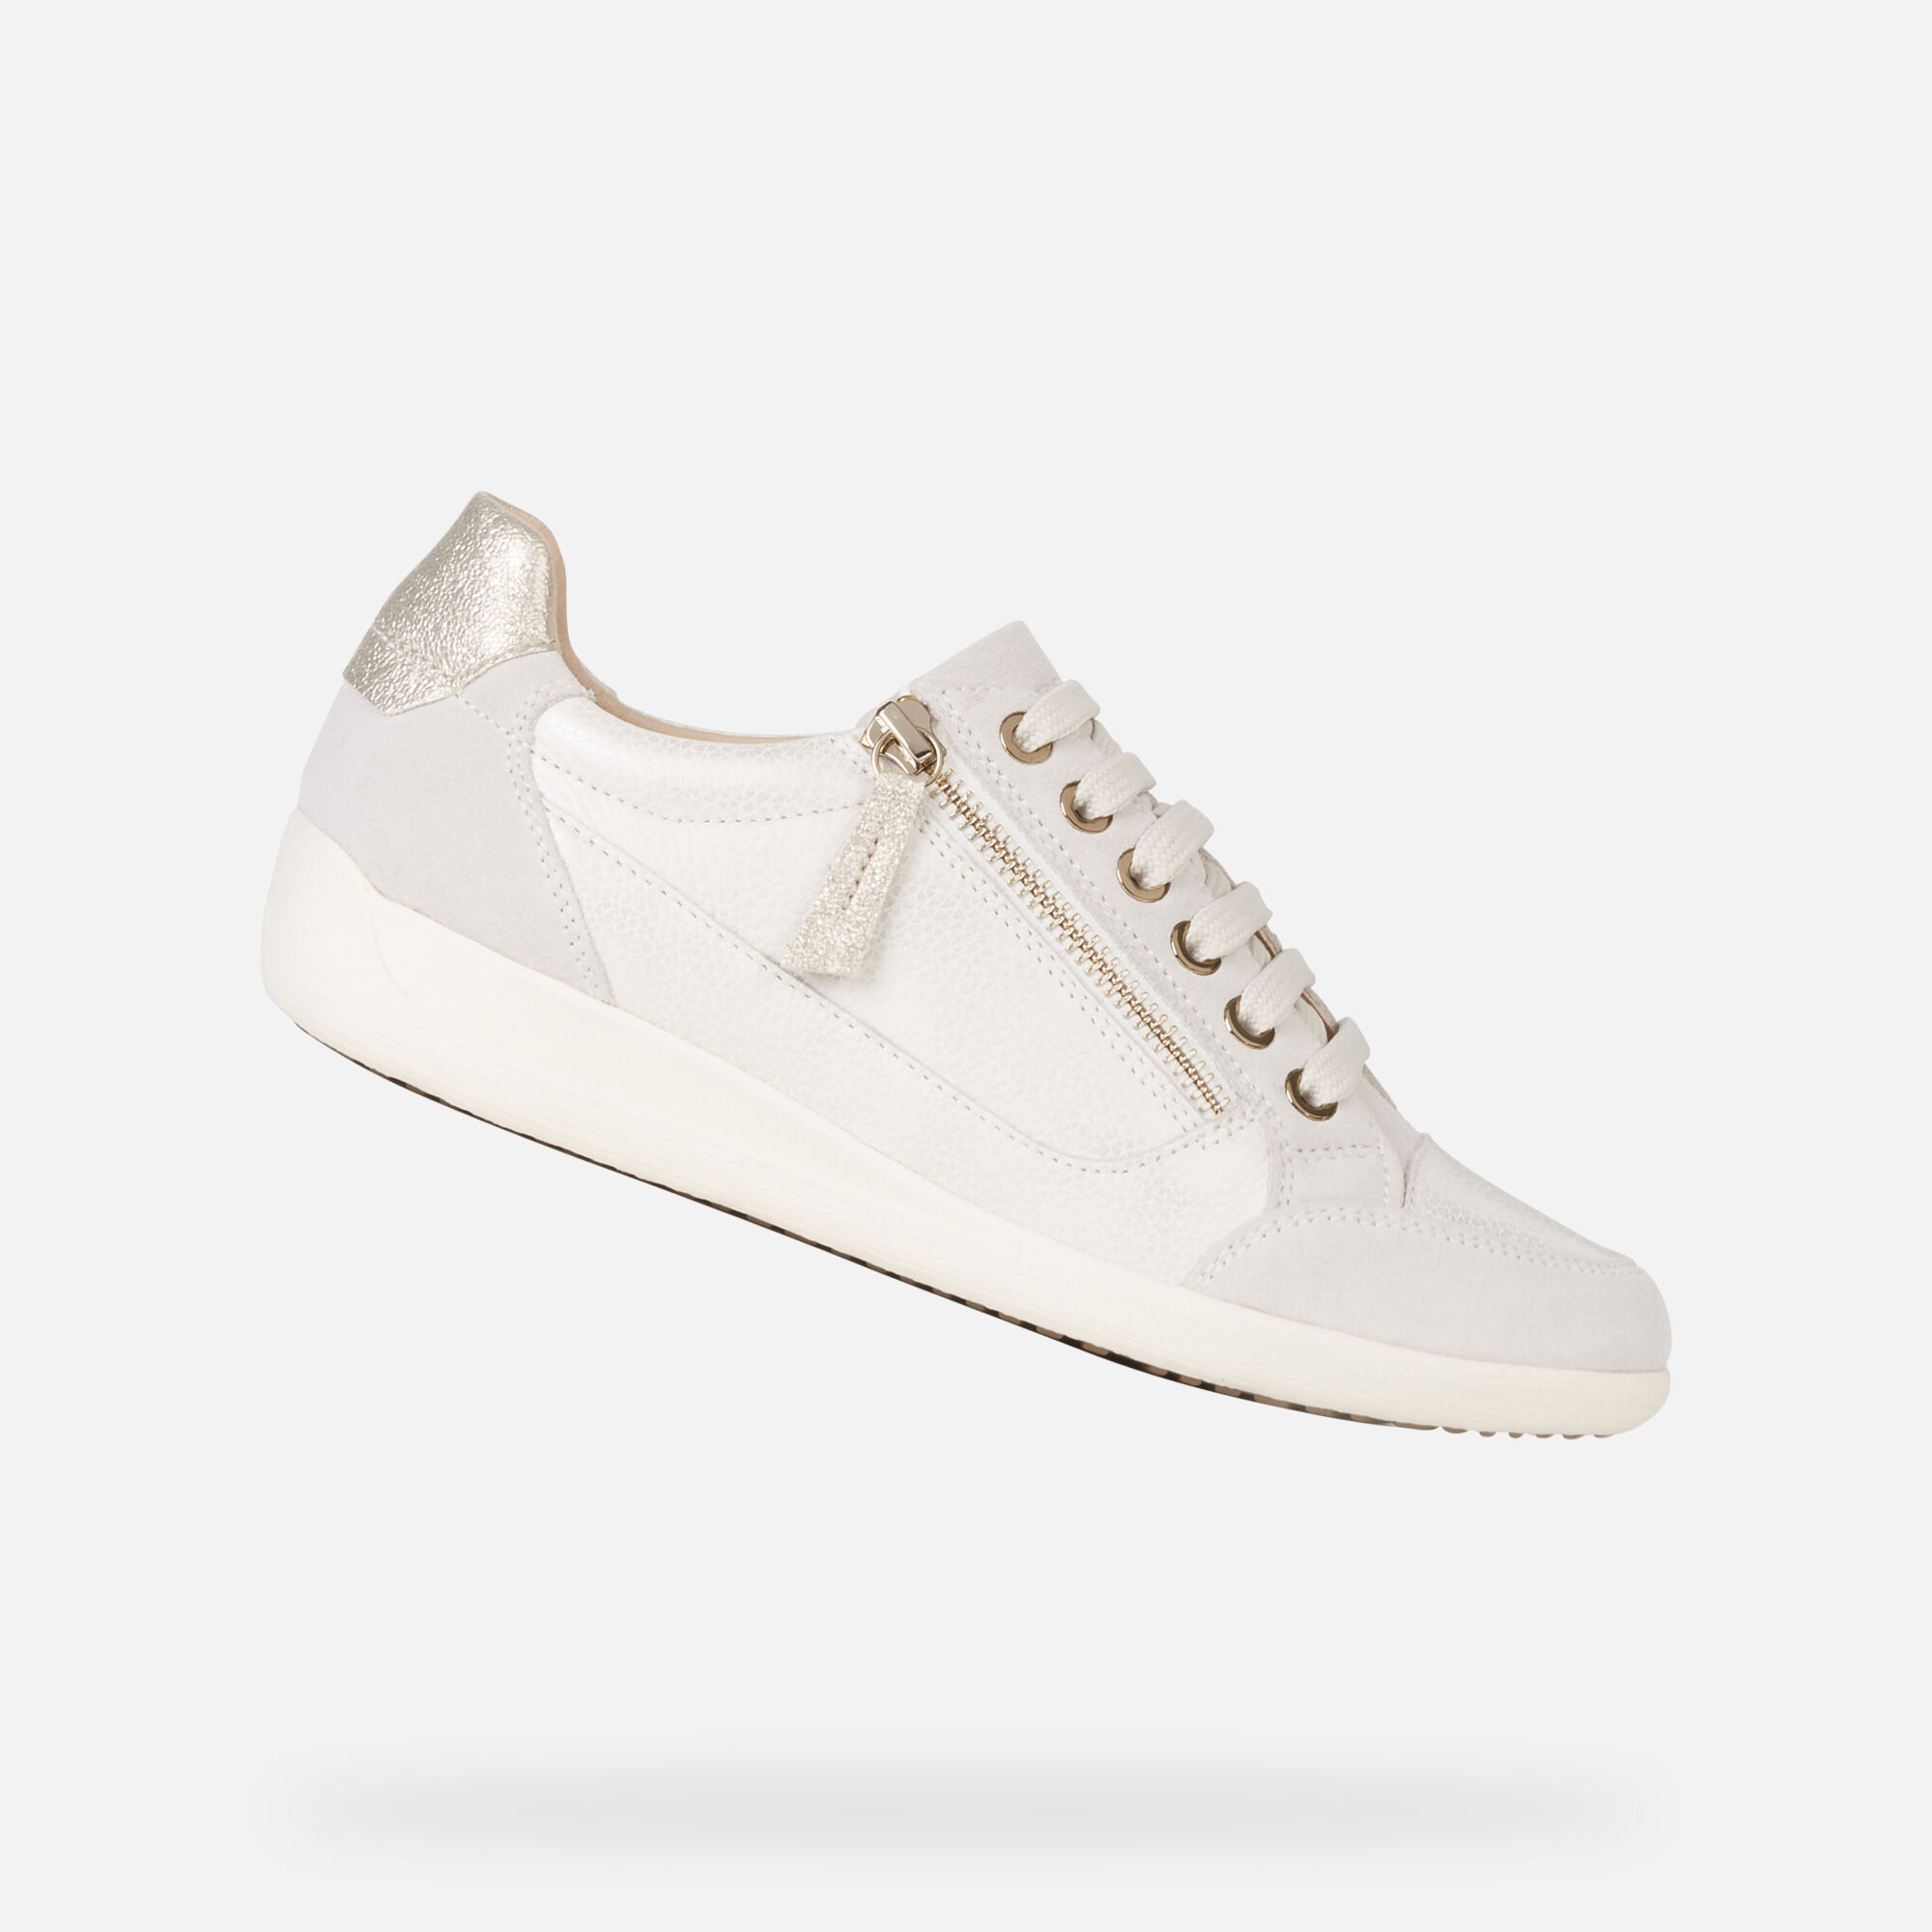 Geox MYRIA Woman: Champagne Sneakers | Geox ® Official Store